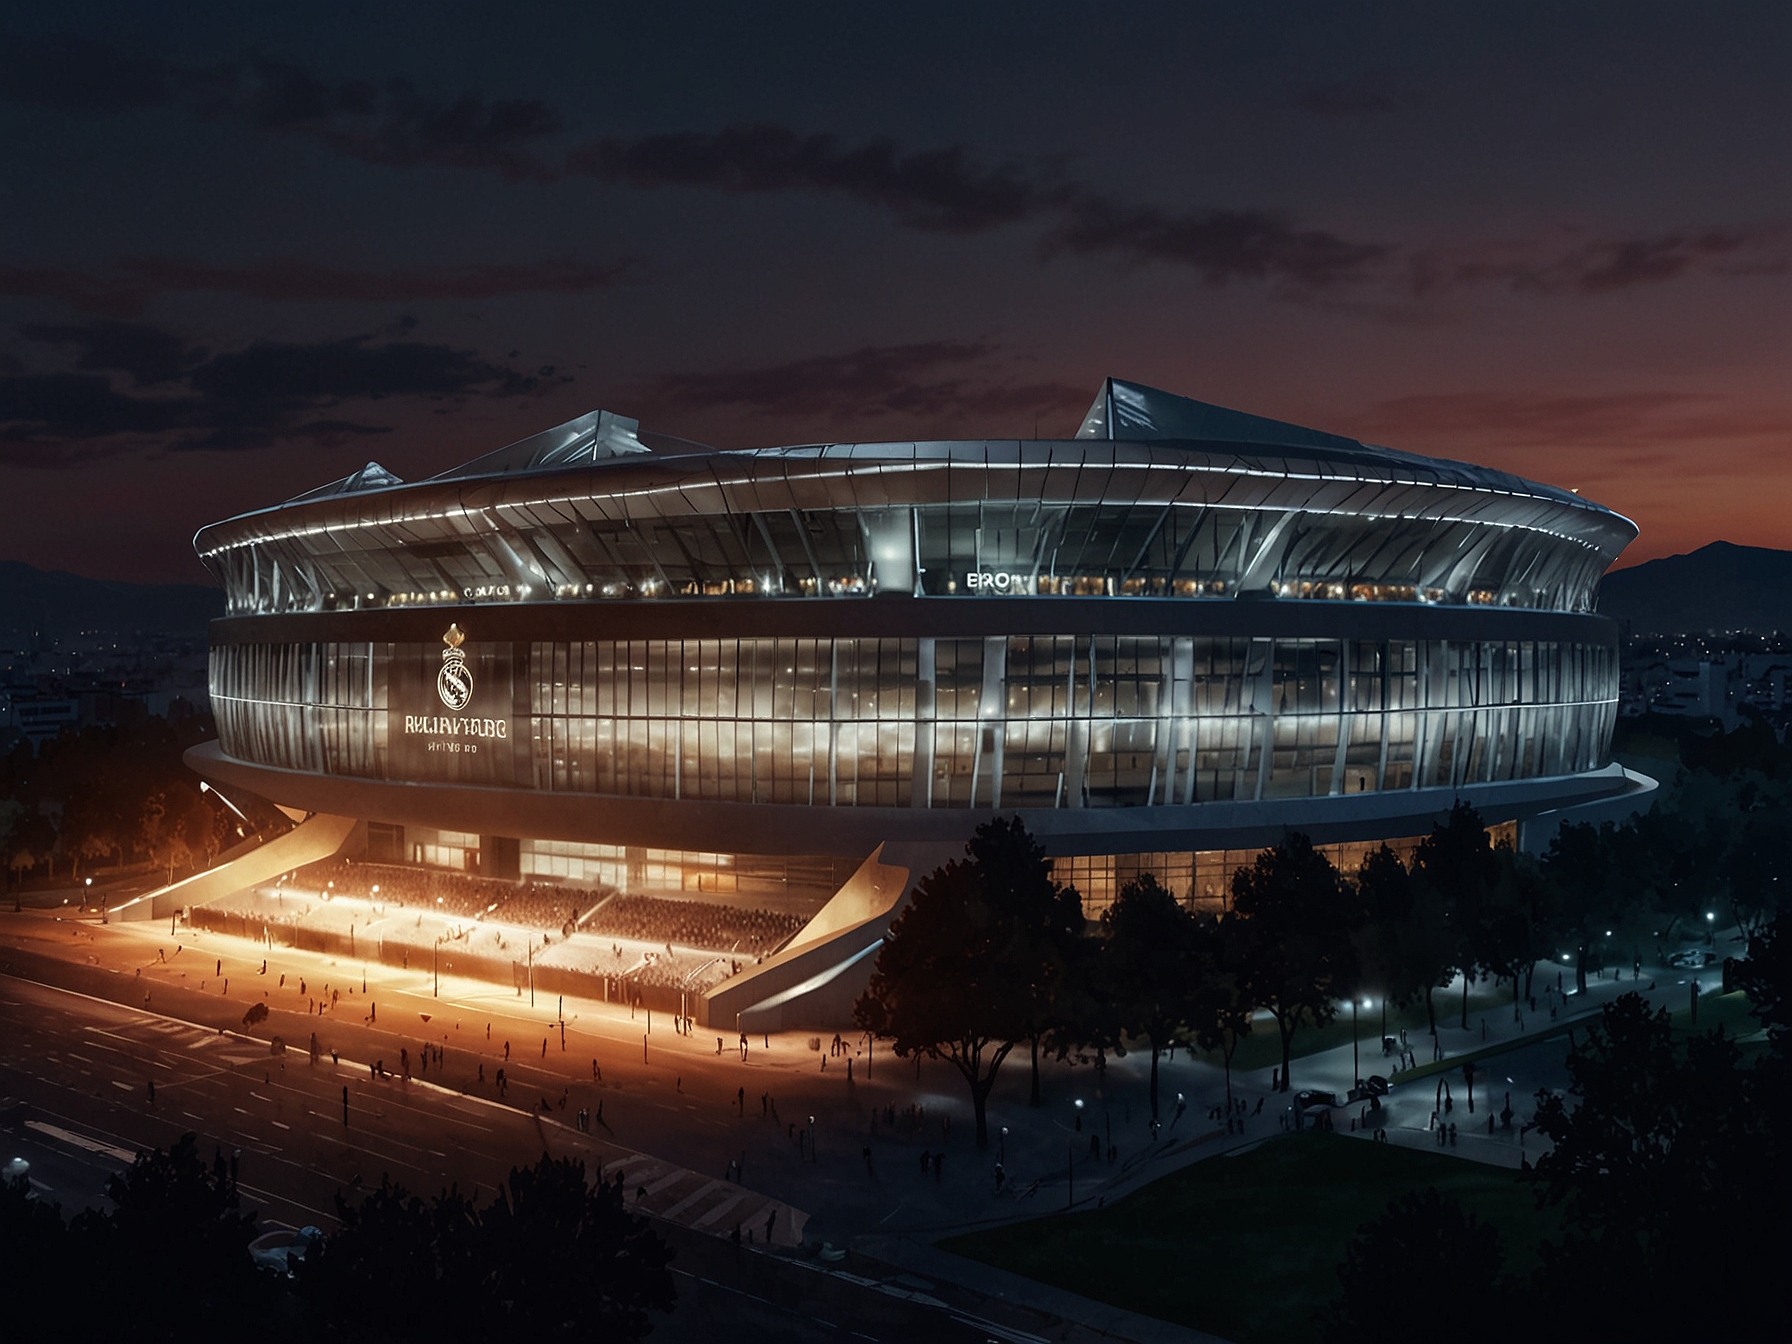 Real Madrid's iconic stadium, Santiago Bernabeu, symbolizing the significant move Mbappe is anticipated to make, affecting his participation in events like the Paris Olympics.